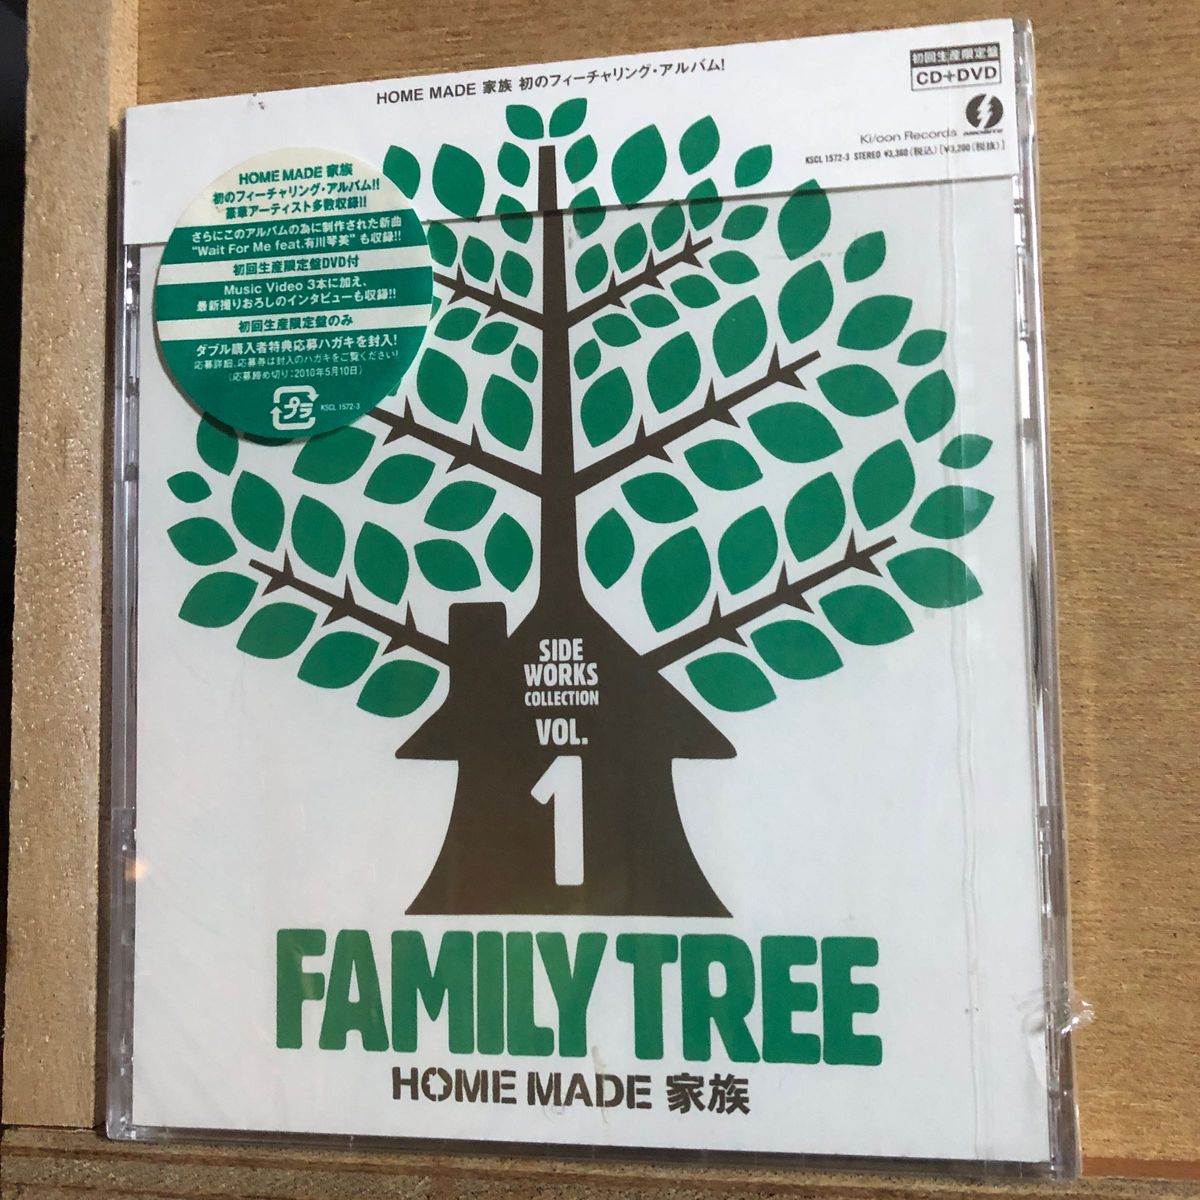 HOME MADE 家族 『FAMILY TREE〜Side Works Collection Vol.1〜 初回限定CD+DVD